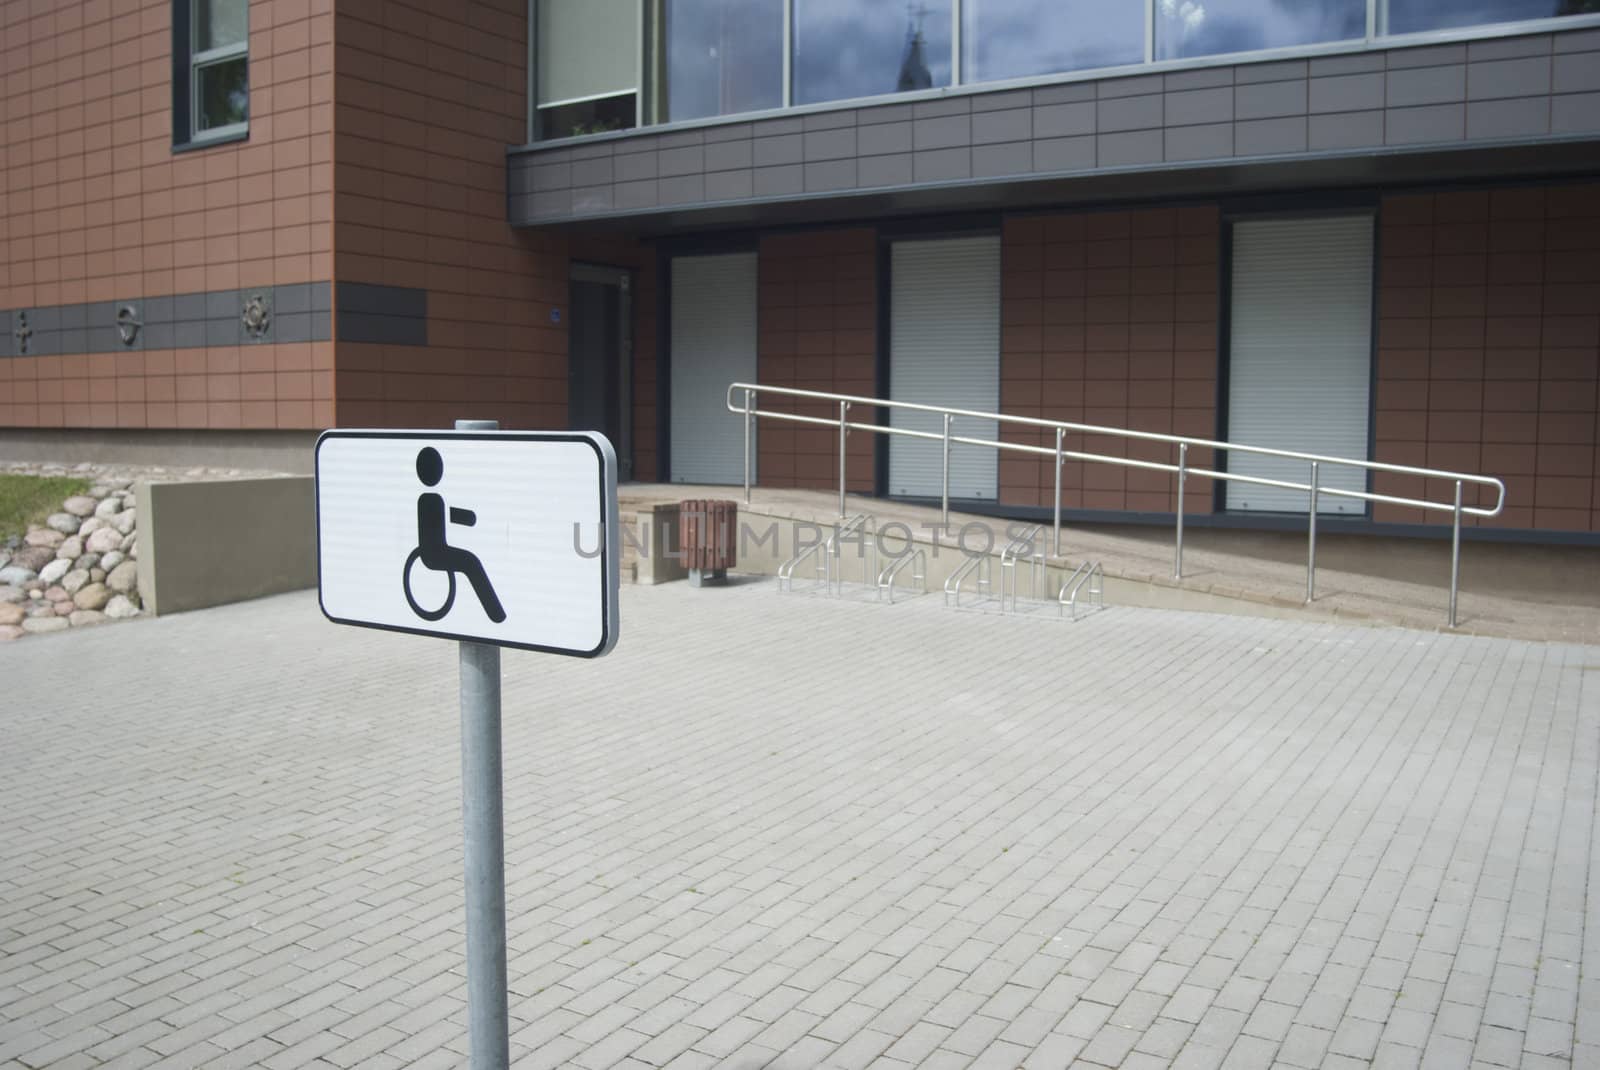 parking place and the disabled ramp